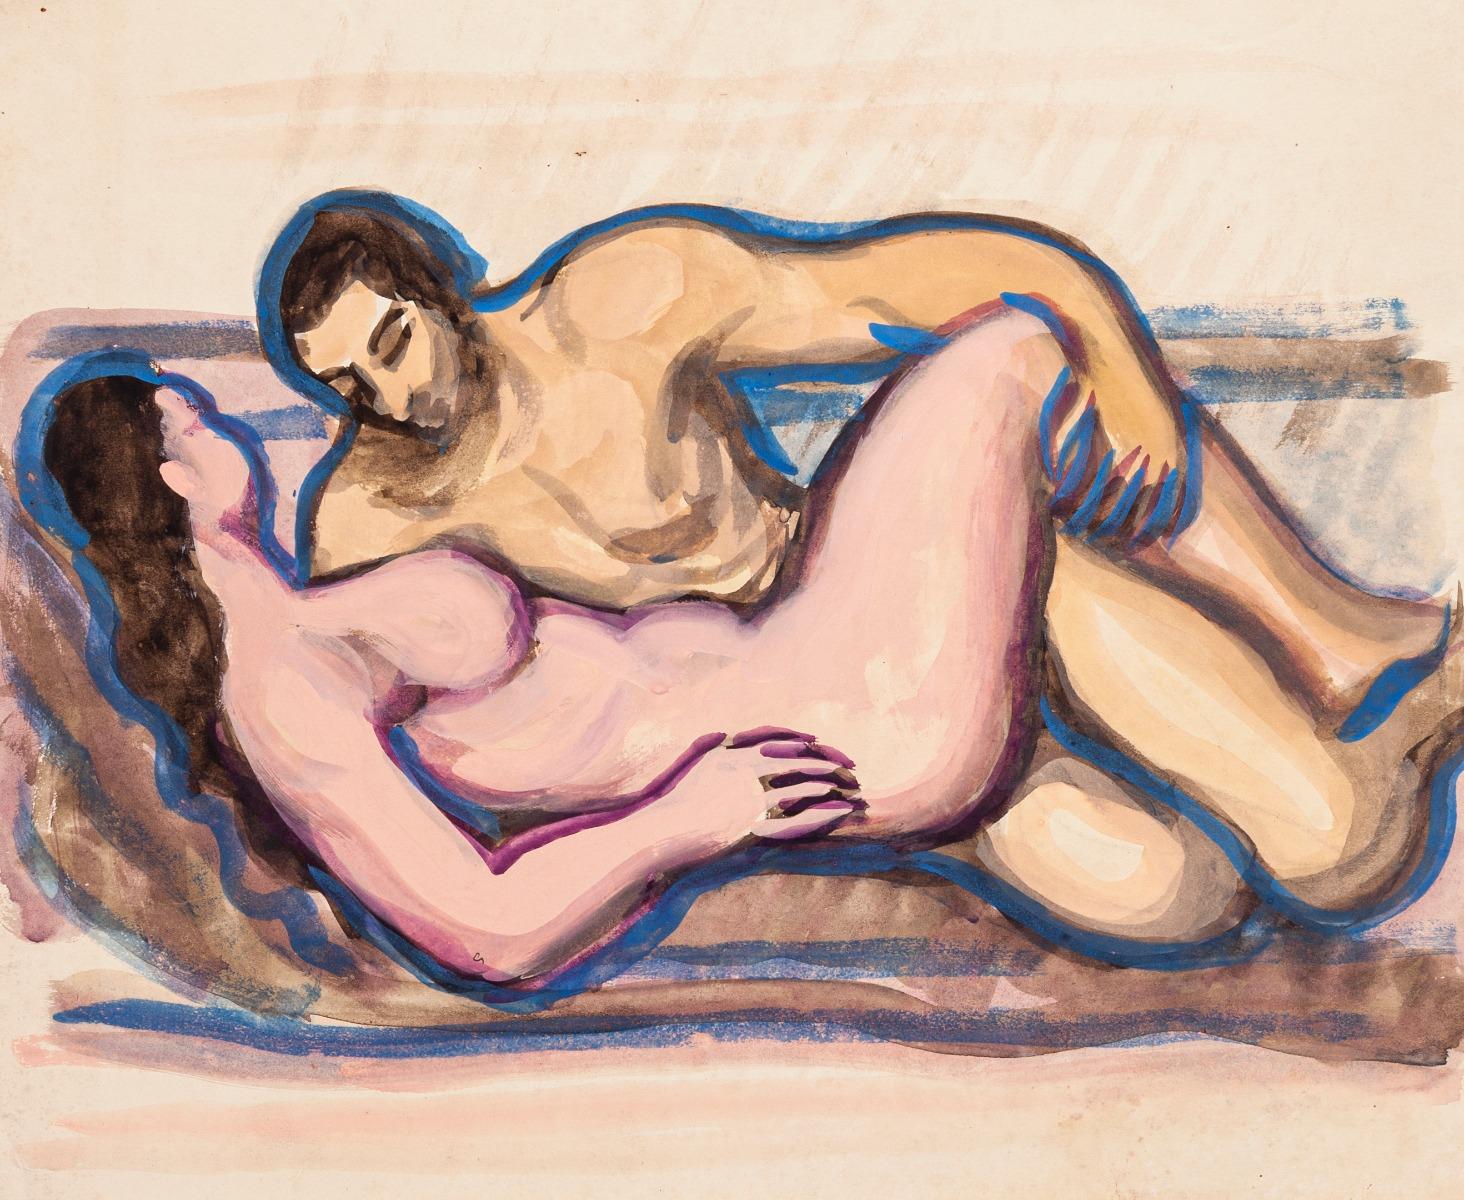 Unknown Nude – Lovers - Aquarell - 1950 ca.